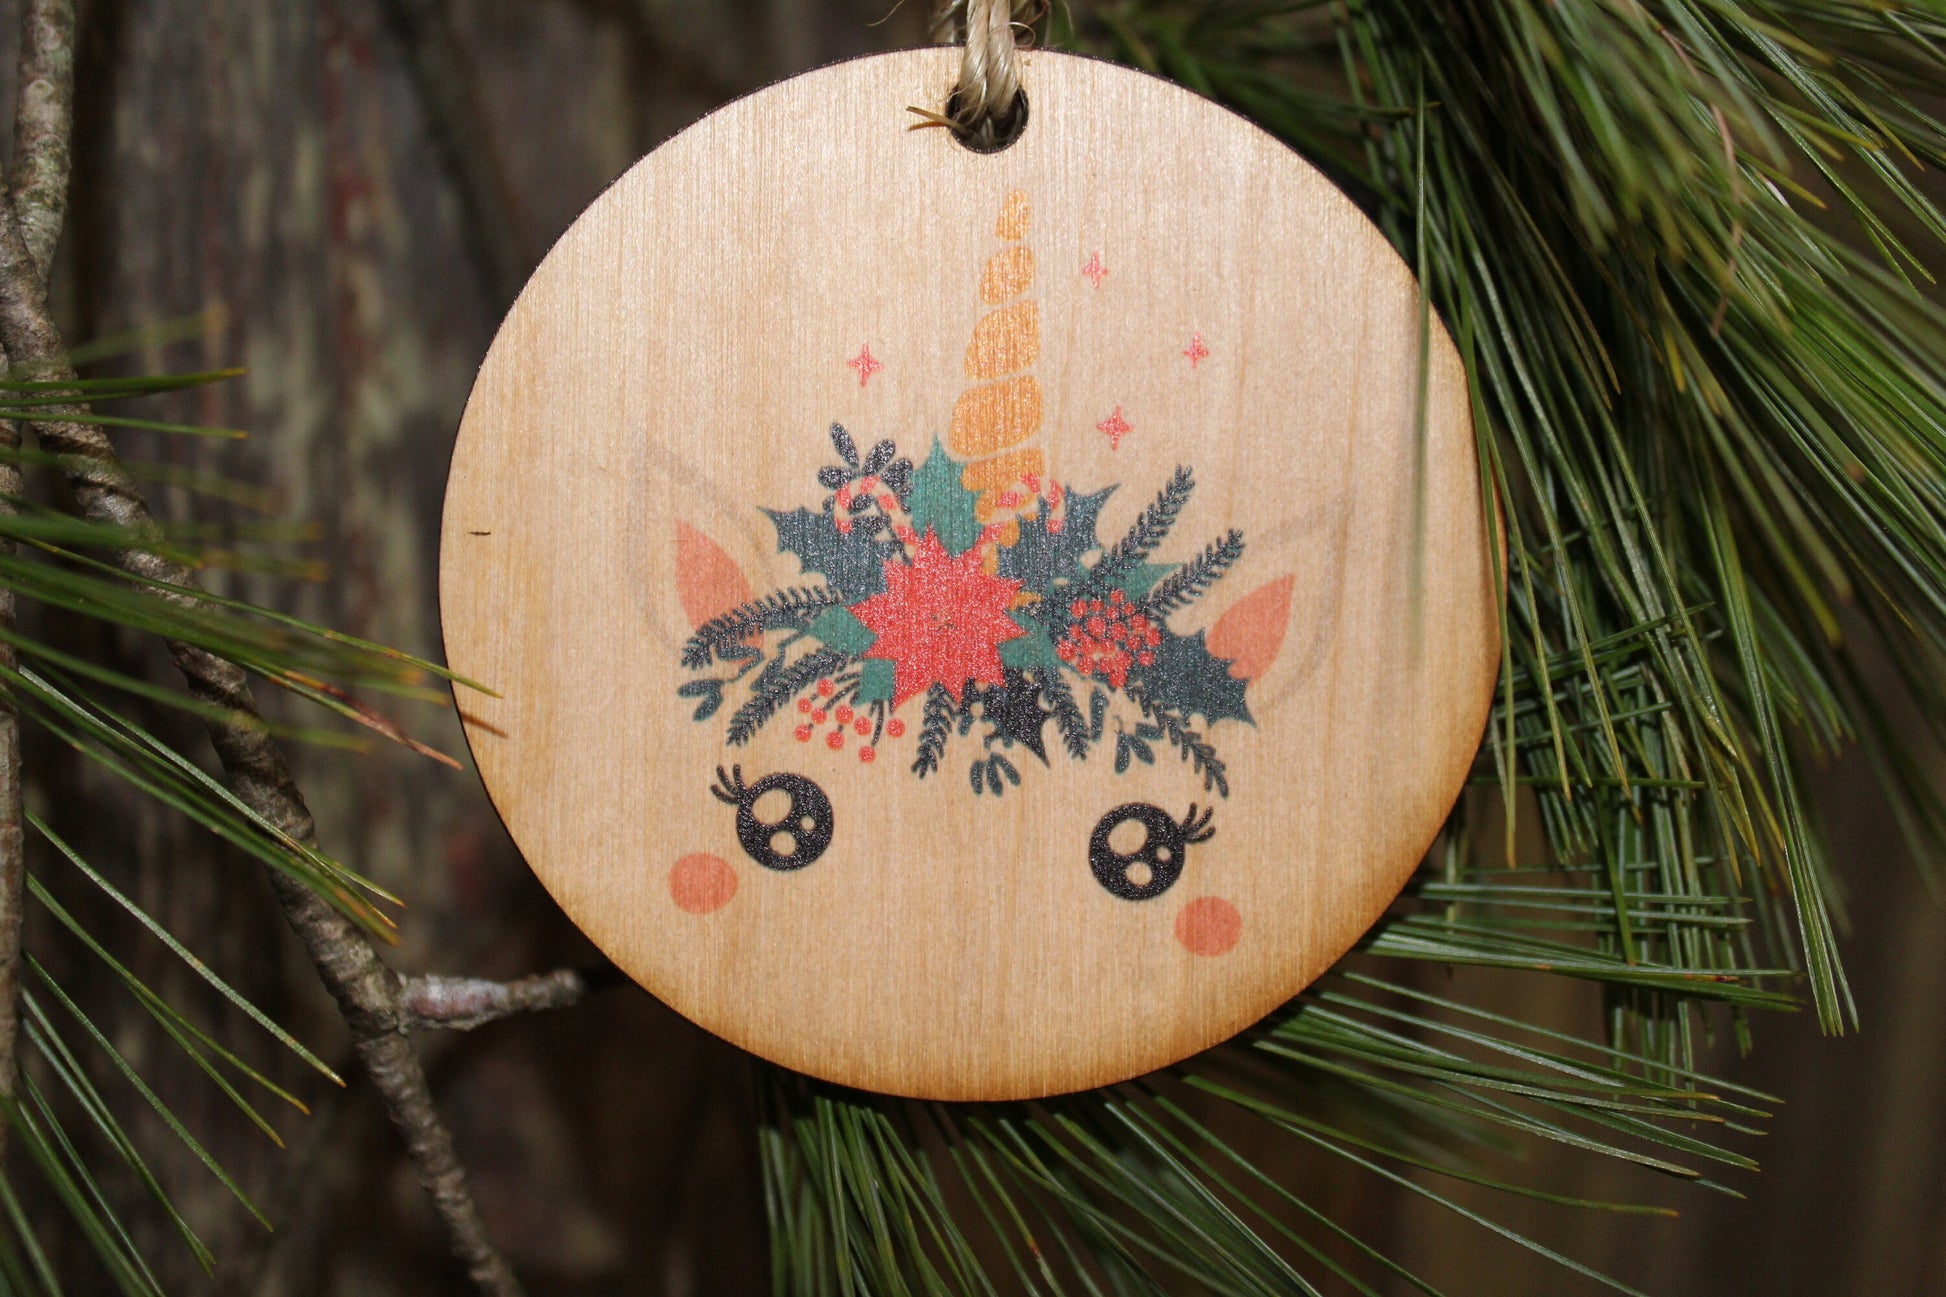 Unicorn Up-close Face Ornament Wood Slice Floral Crown Flowers Crown Primitive Christmas Ornament Rustic Tree Printed